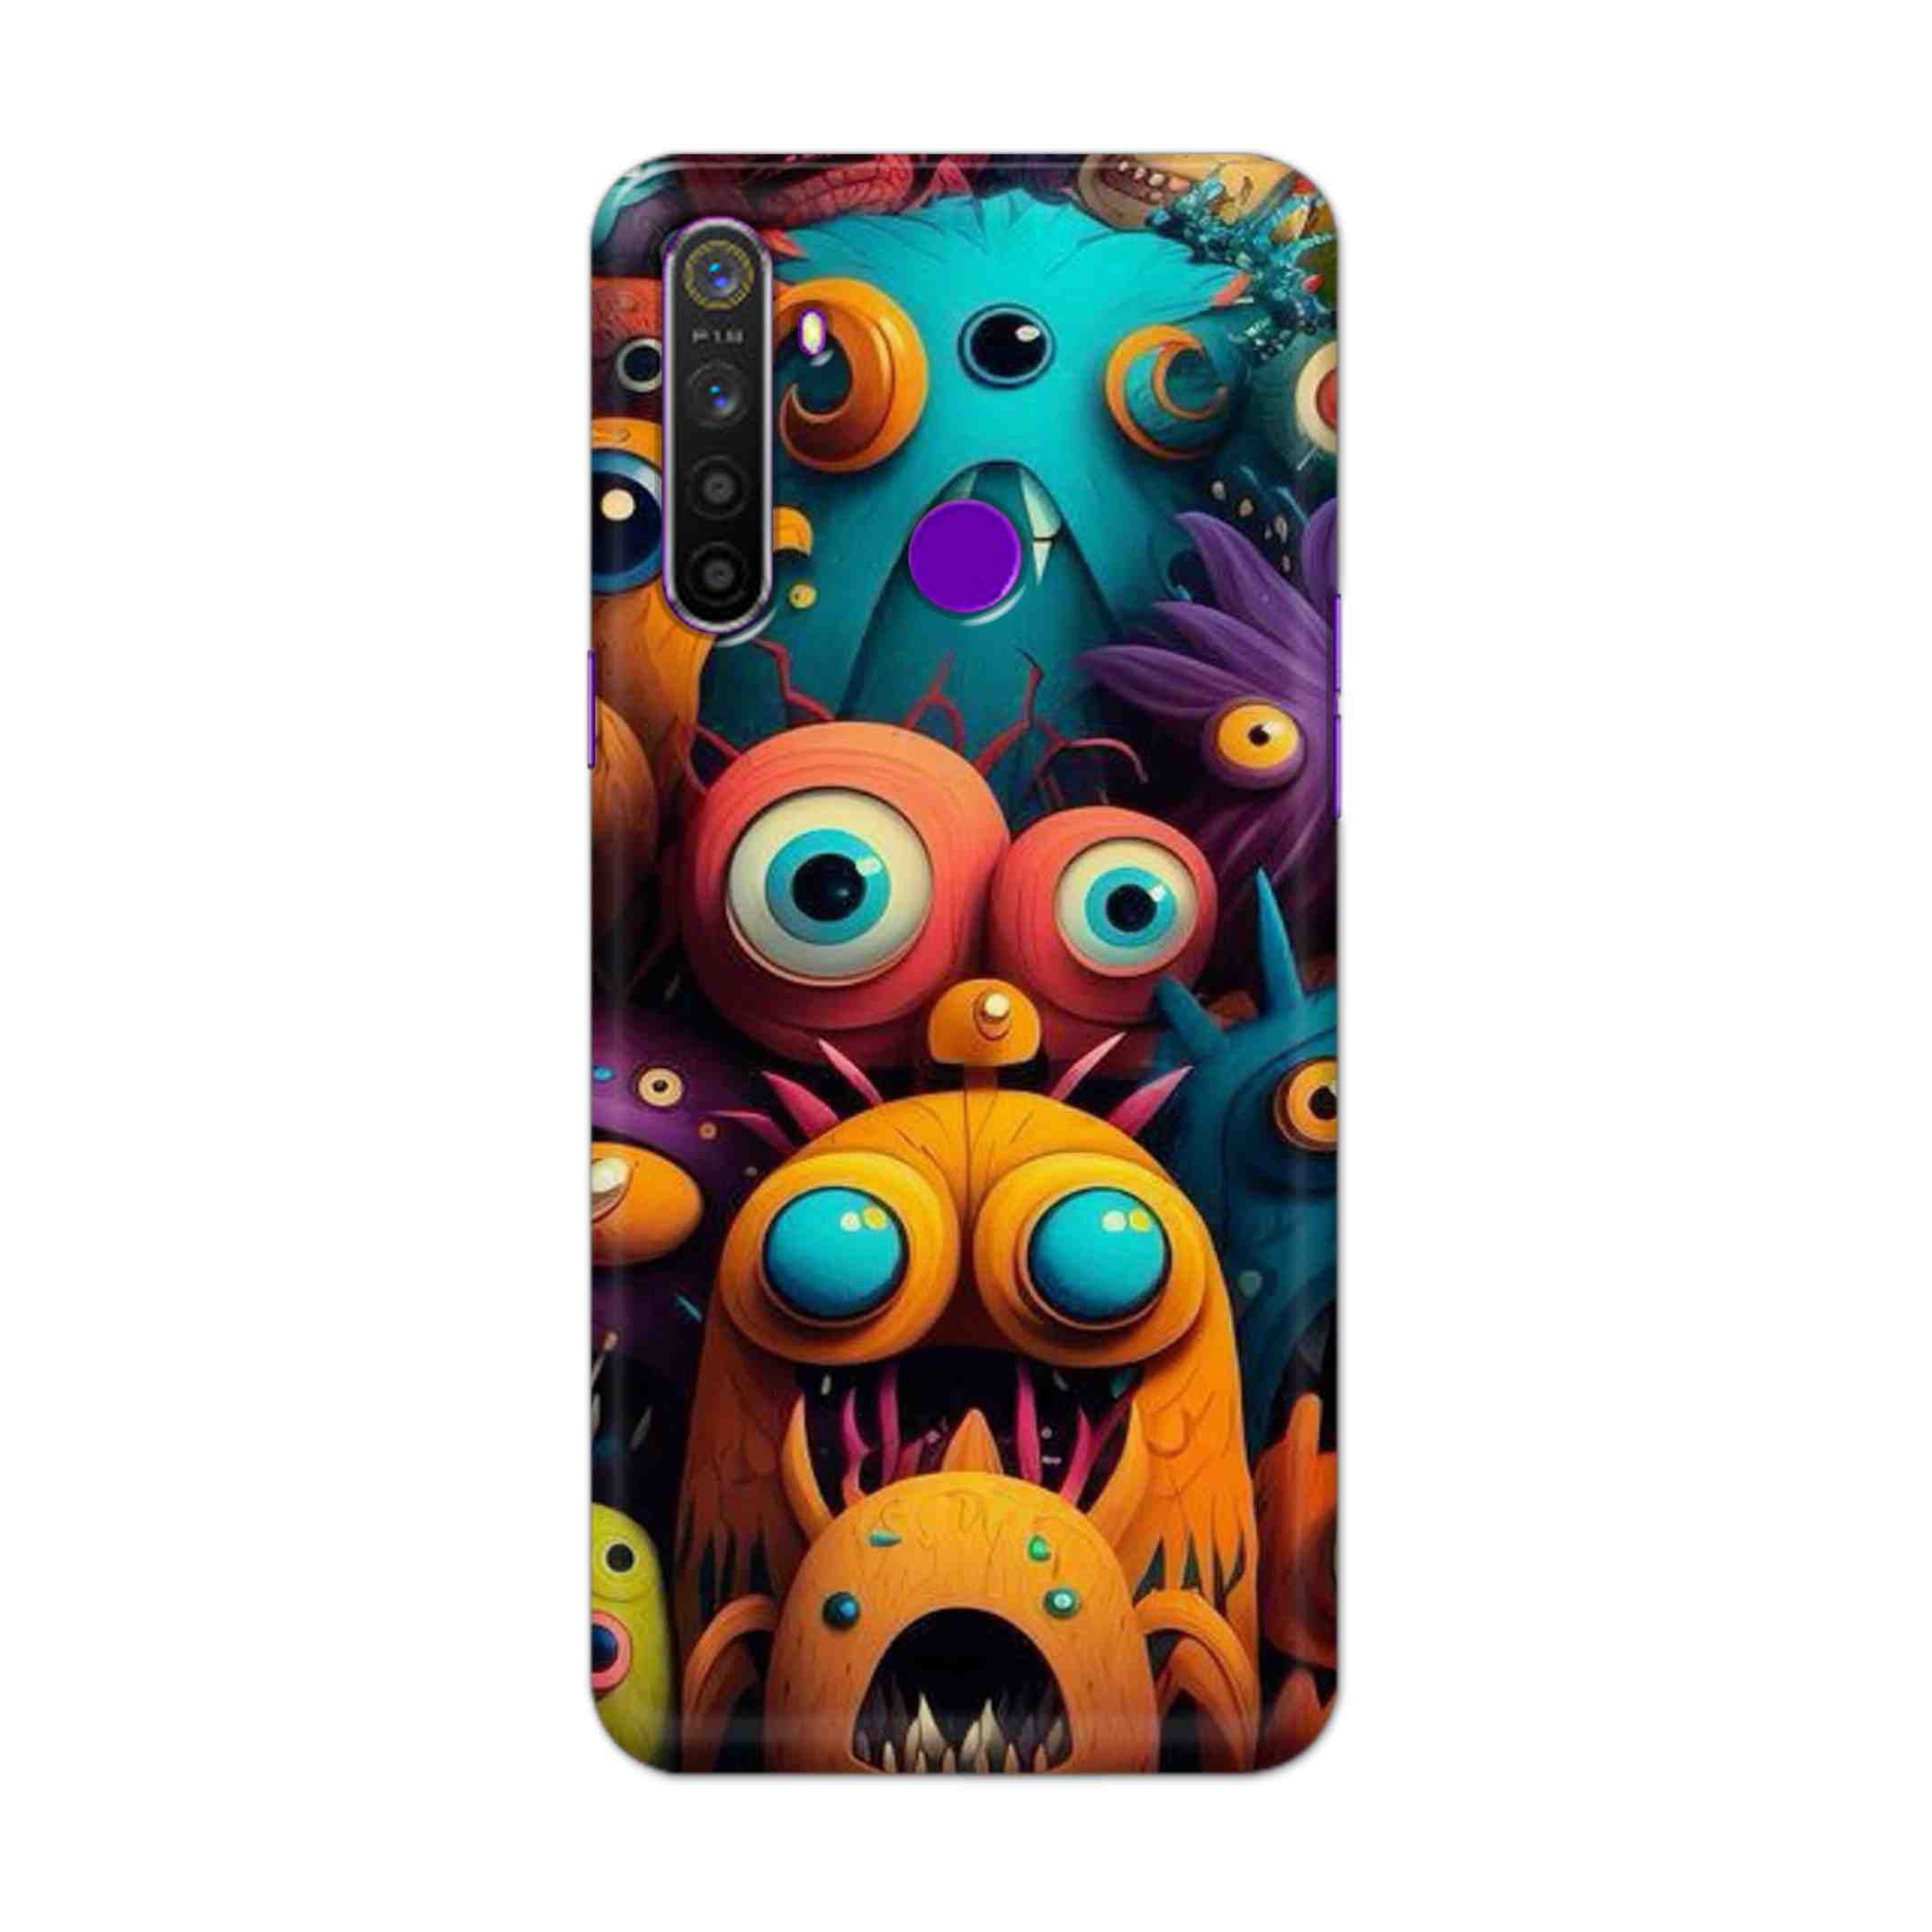 Buy Zombie Hard Back Mobile Phone Case Cover For Realme 5 Pro Online